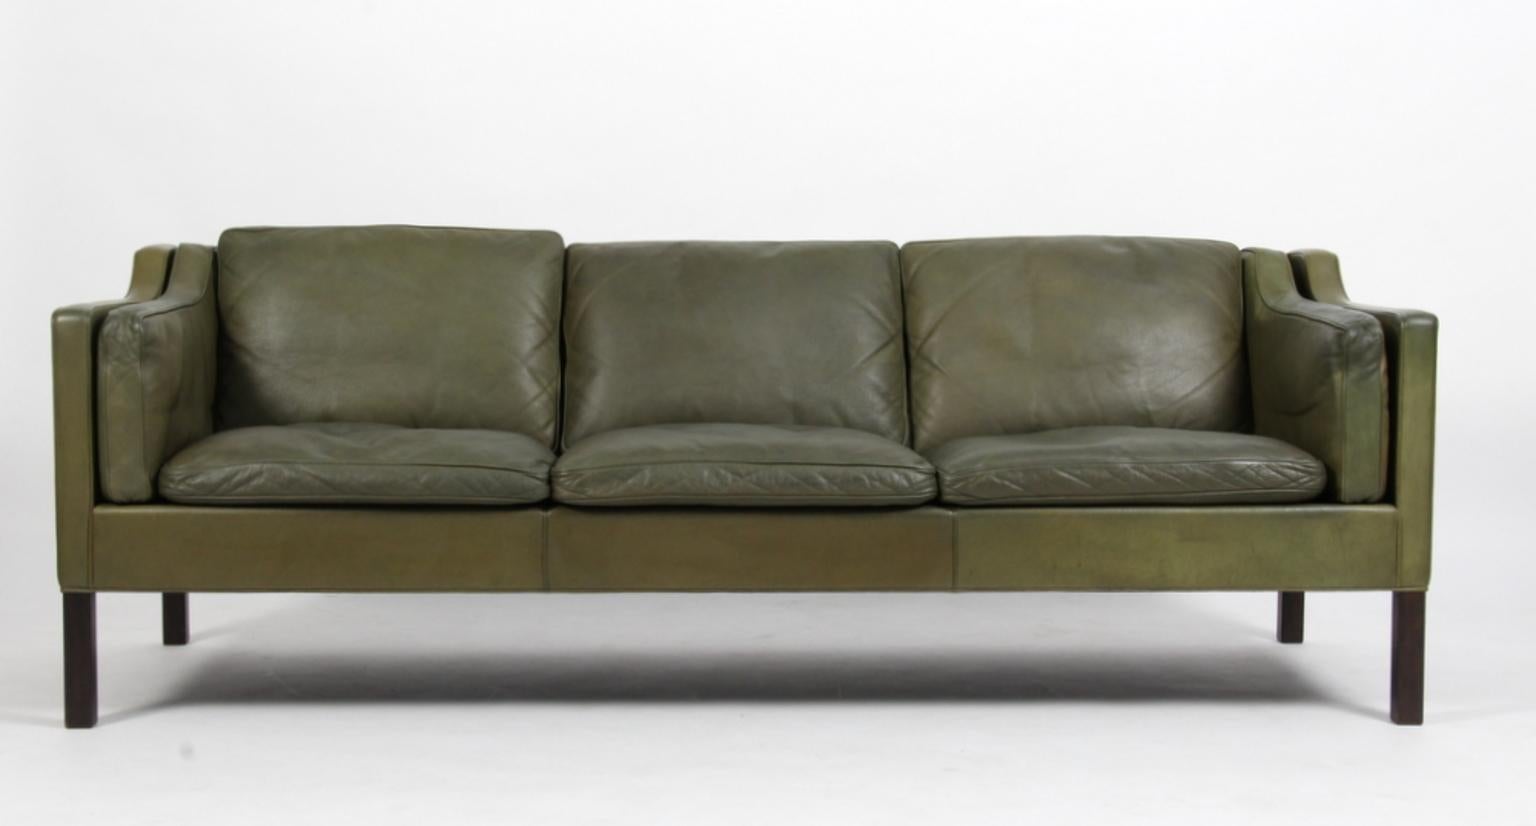 Børge Mogensen three-seat sofa in original green leather upholstery with patina.

Legs of mahogany.

Model 2213, made by Fredericia furniture.